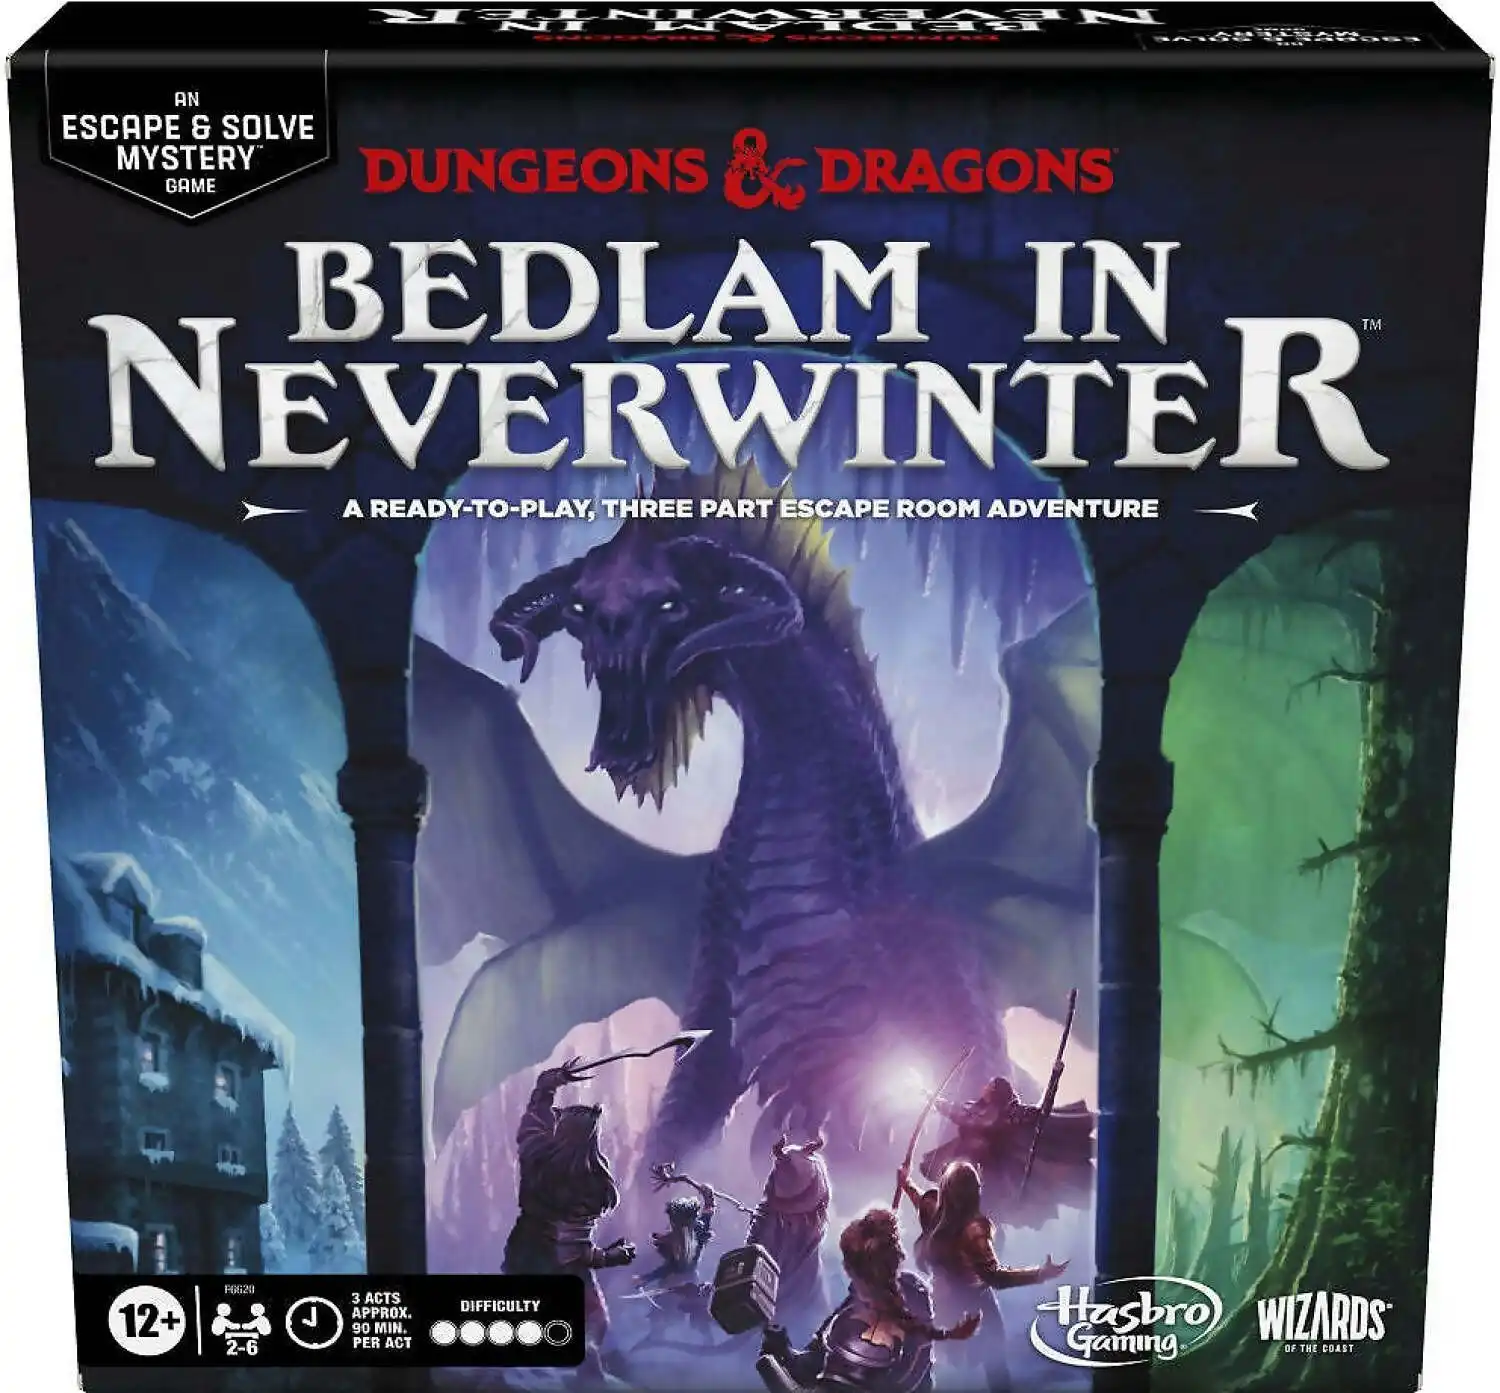 Dungeons And Dragons - Bedlam In Neverwinter An Escape & Solve Mystery Game - Hasbro